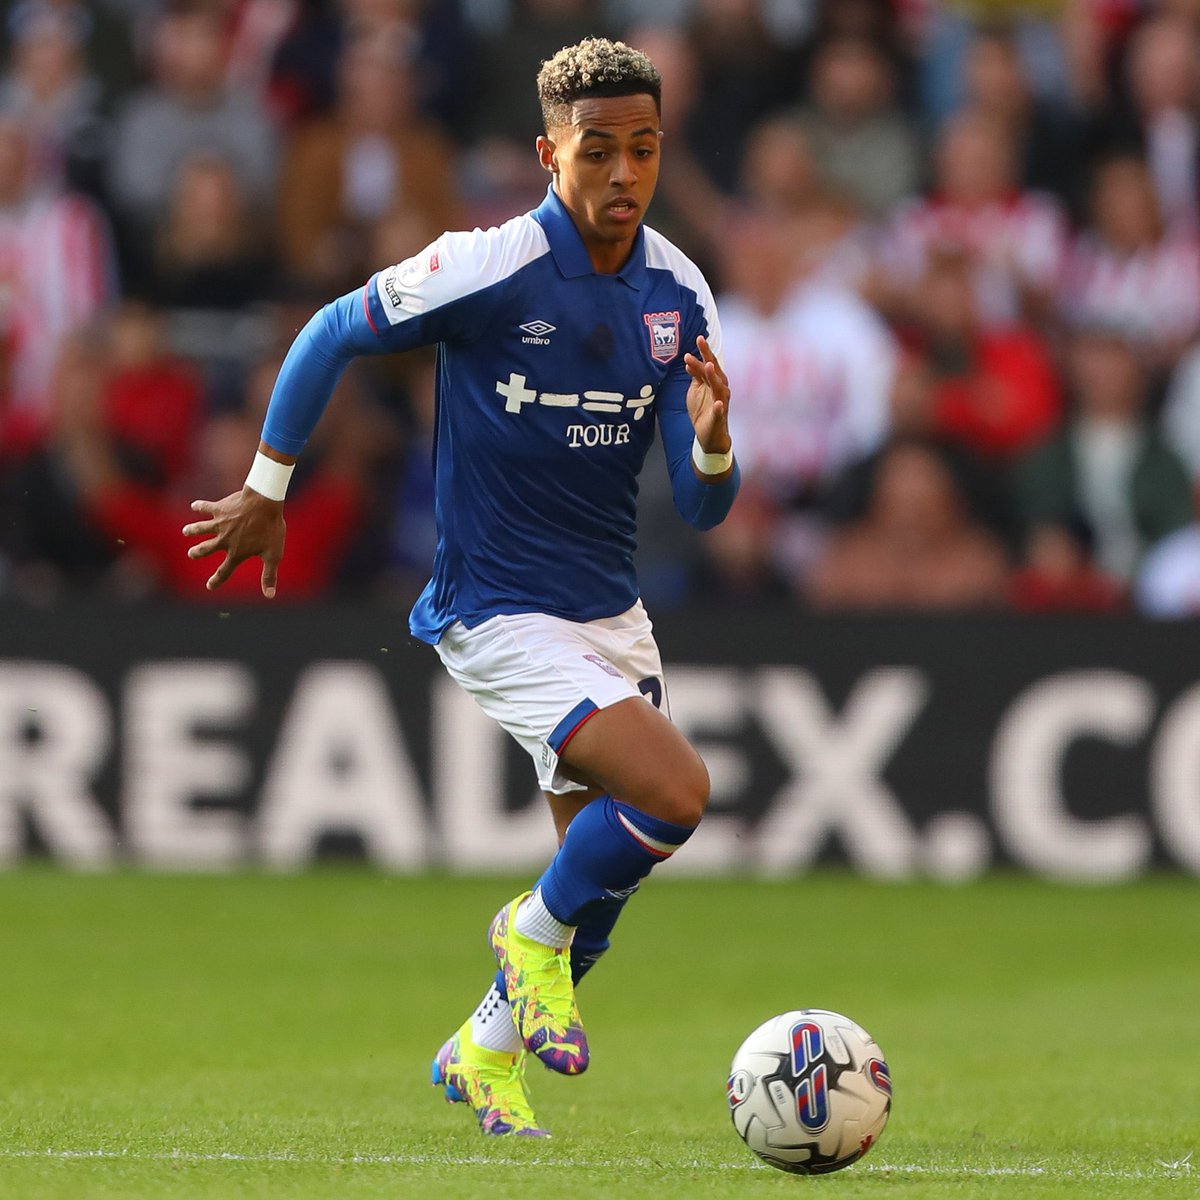 Omari Hutchinson scores another goal for Ipswich. What a season he has had.